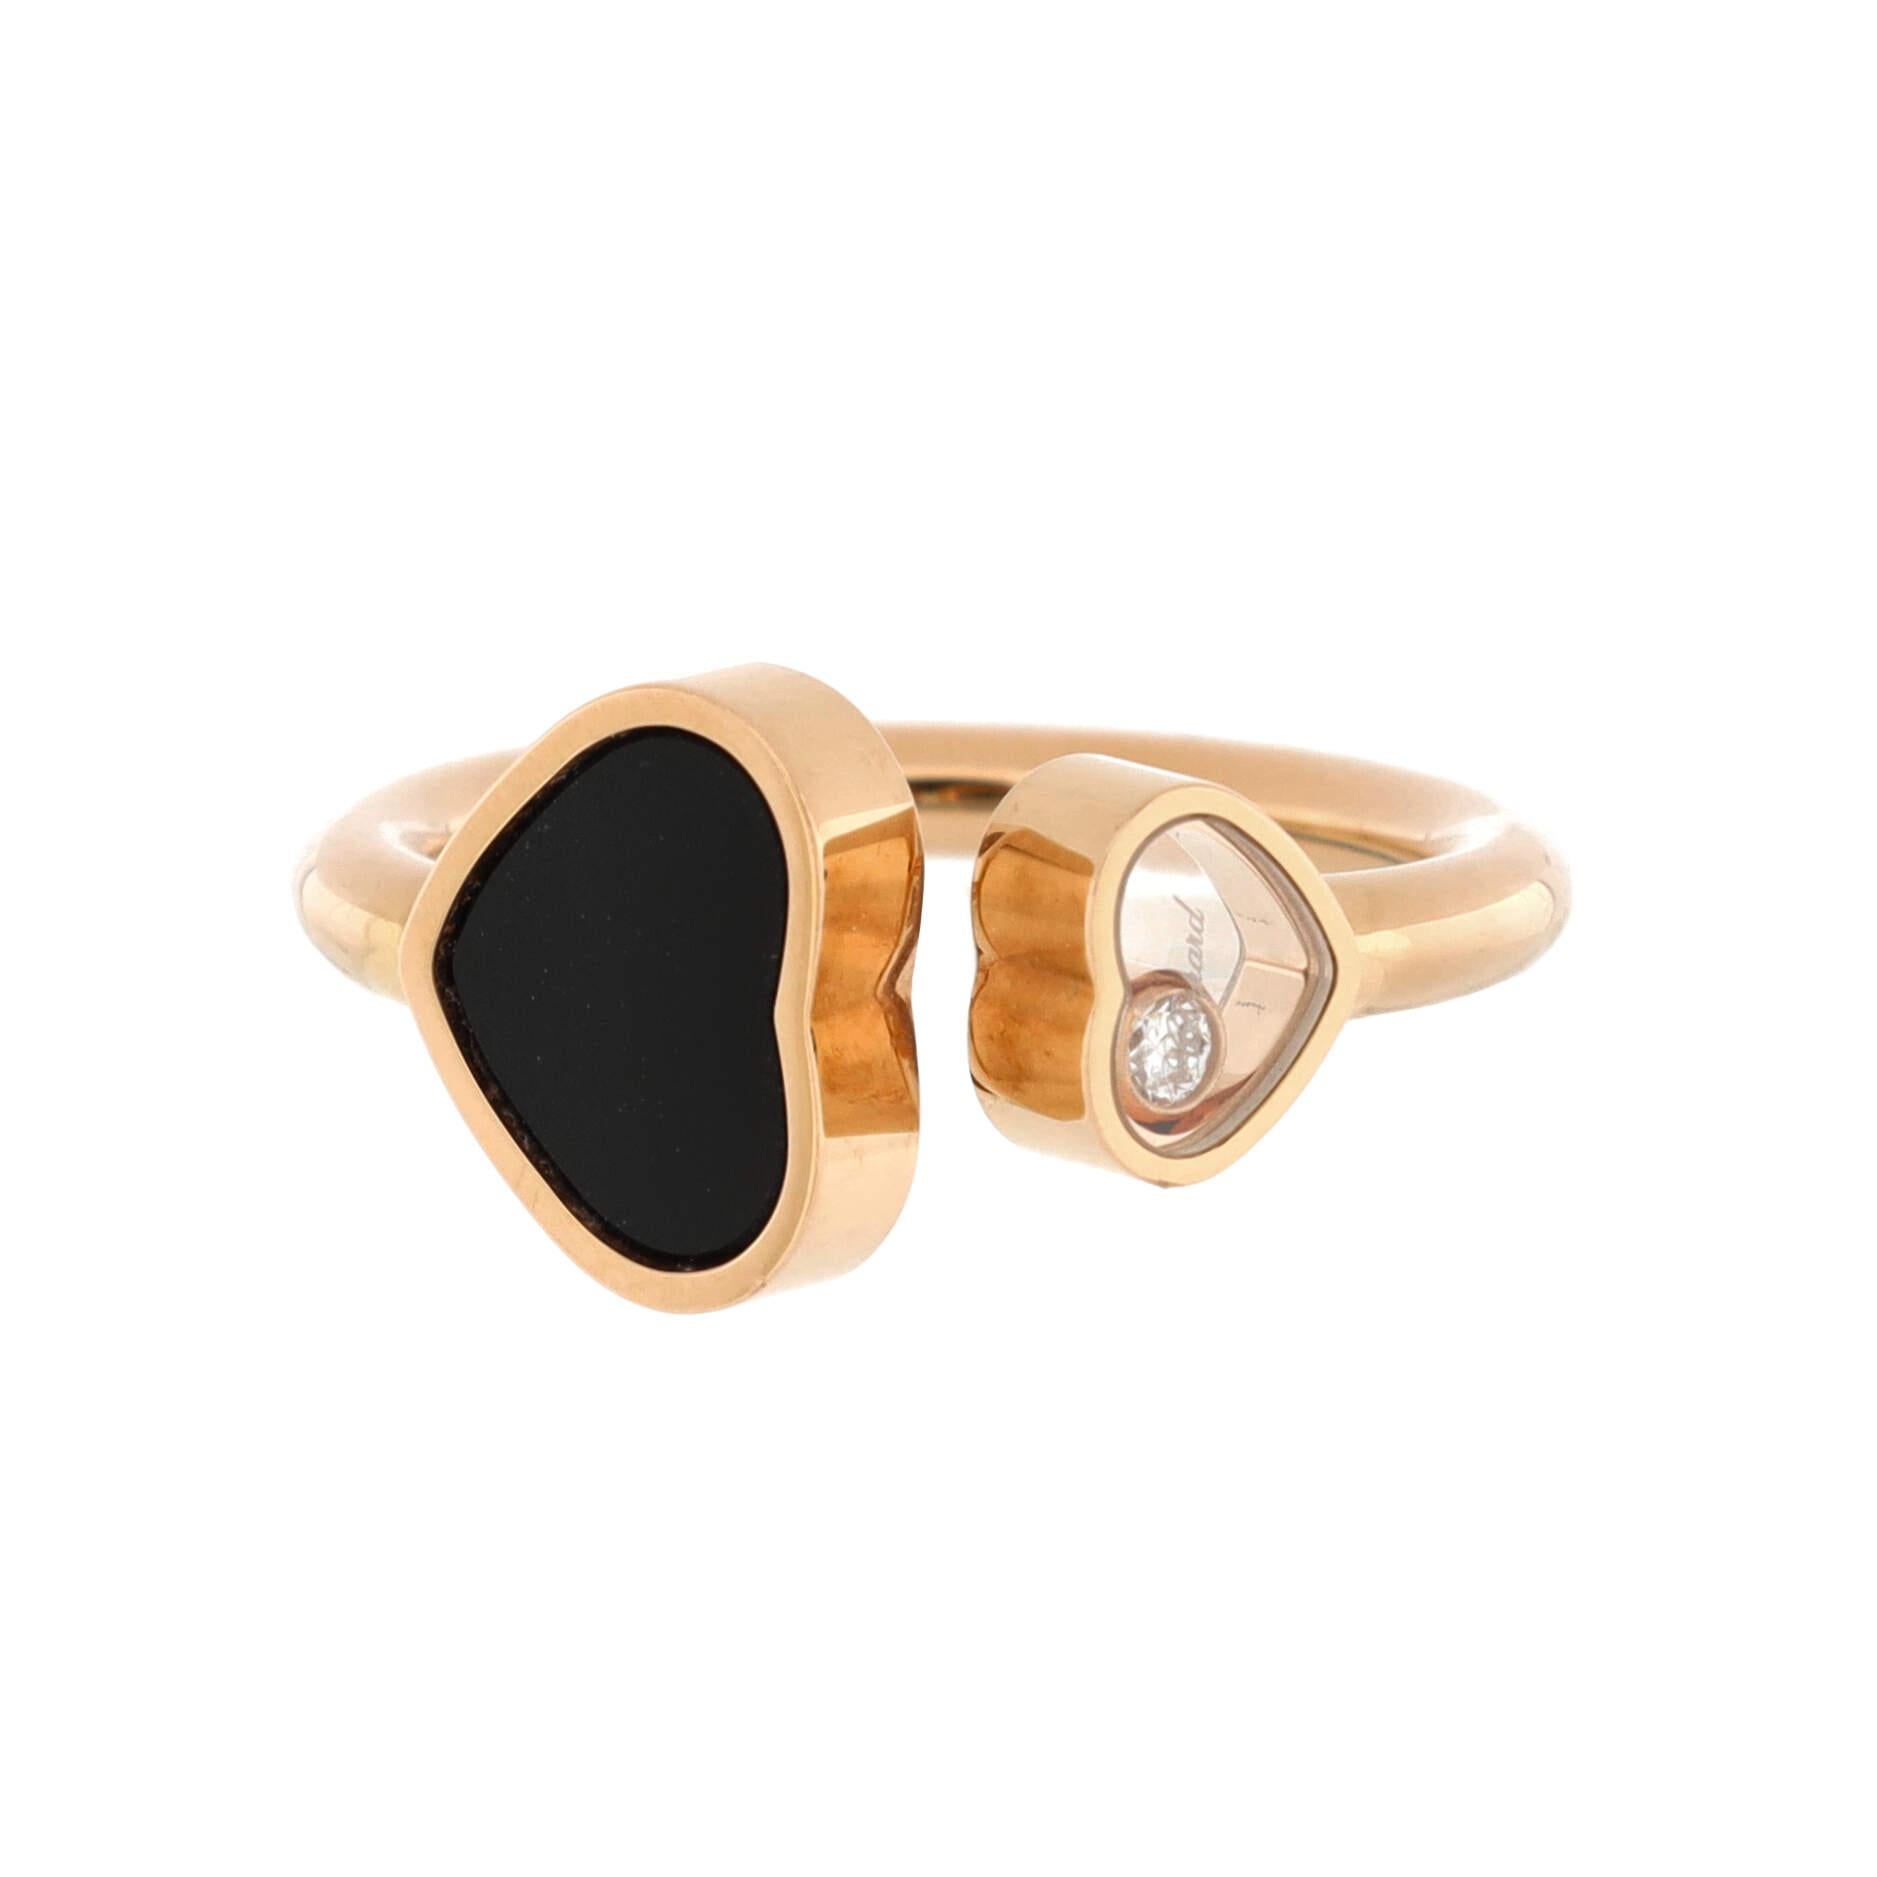 Condition: Great. Minor wear throughout.
Accessories: No Accessories
Measurements: Size: 6.25 - 53, Width: 2.50 mm
Designer: Chopard
Model: Happy Hearts Ring 18K Rose Gold and Onyx with Floating Diamond
Exterior Color: Rose Gold
Item Number: